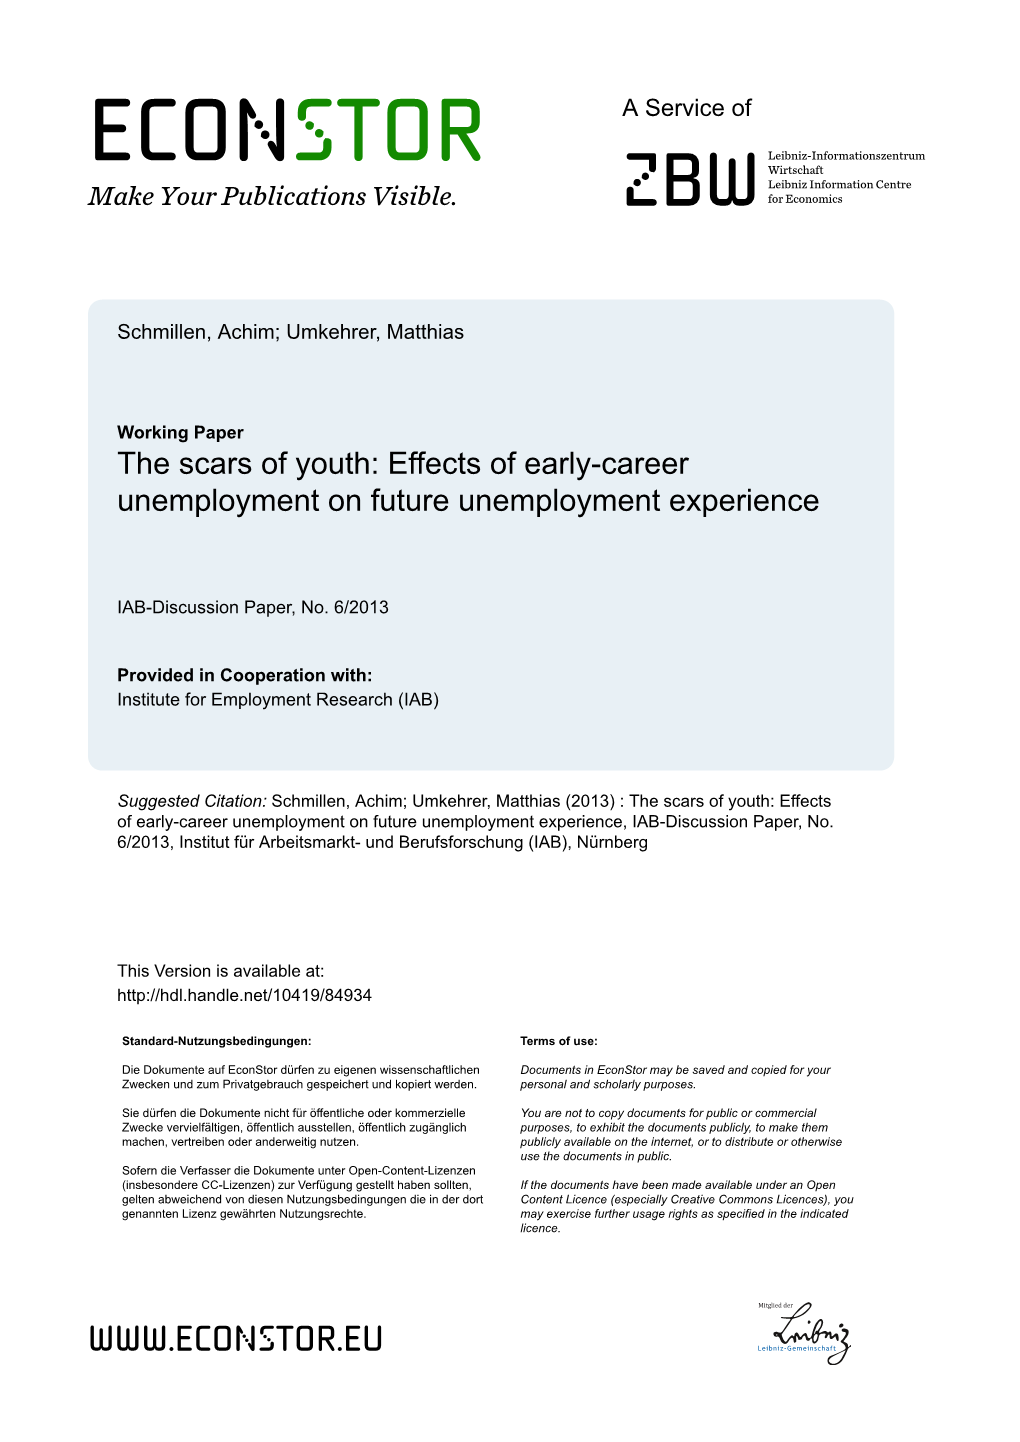 The Scars of Youth: Effects of Early-Career Unemployment on Future Unemployment Experience